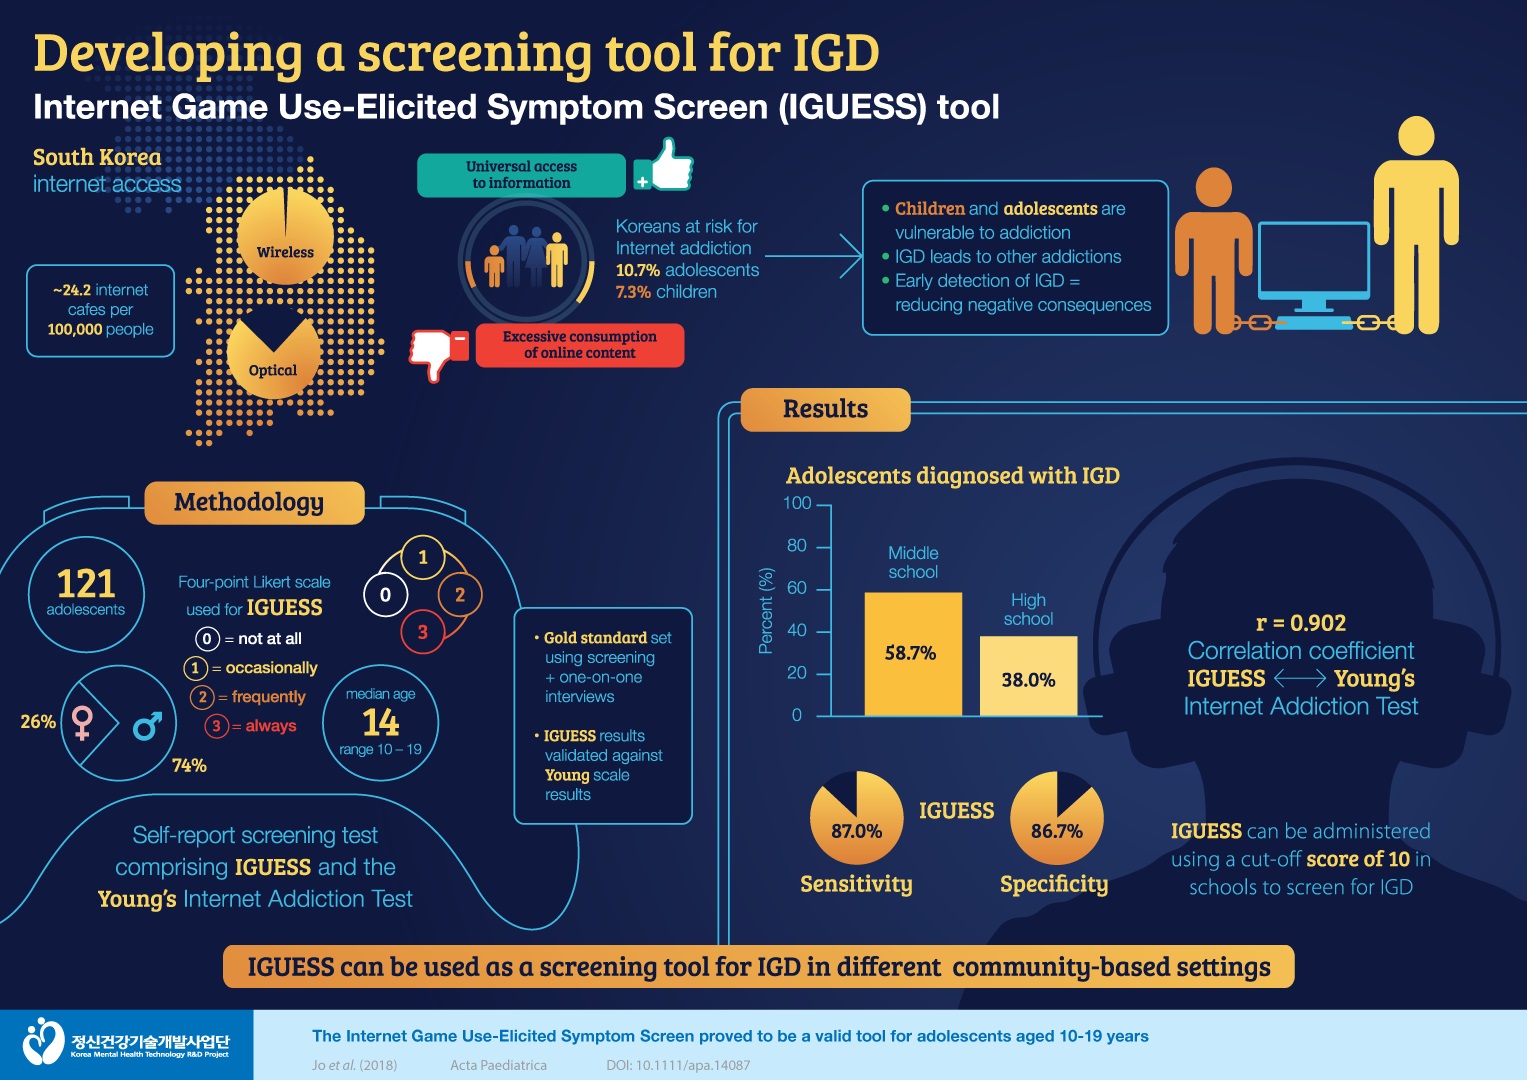 5. Developing a screening tool for IGD